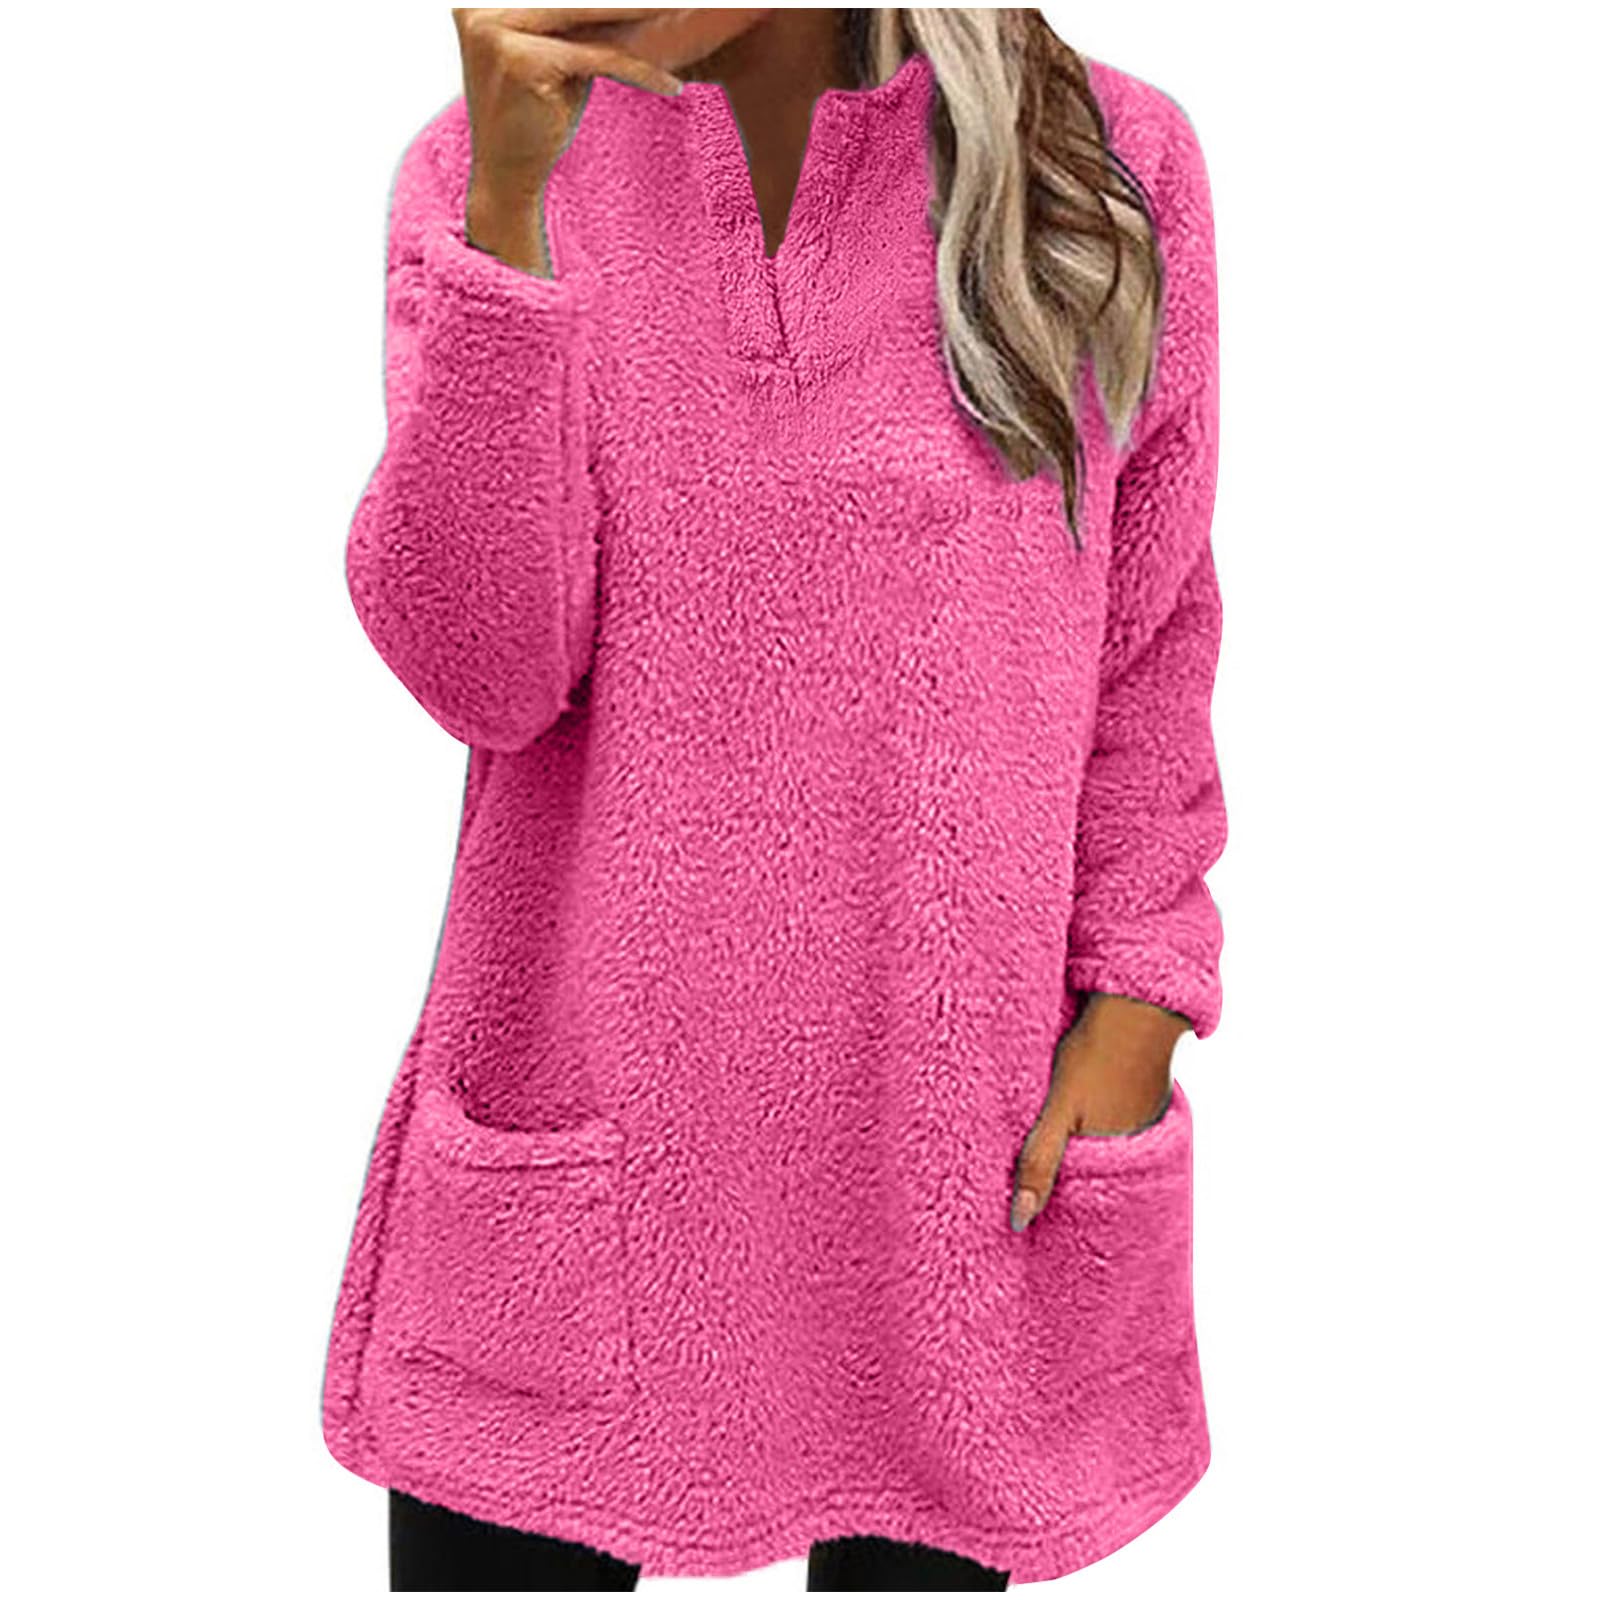 Women's Casual Plain Pullovers Hooded Hot Pink Plus Size